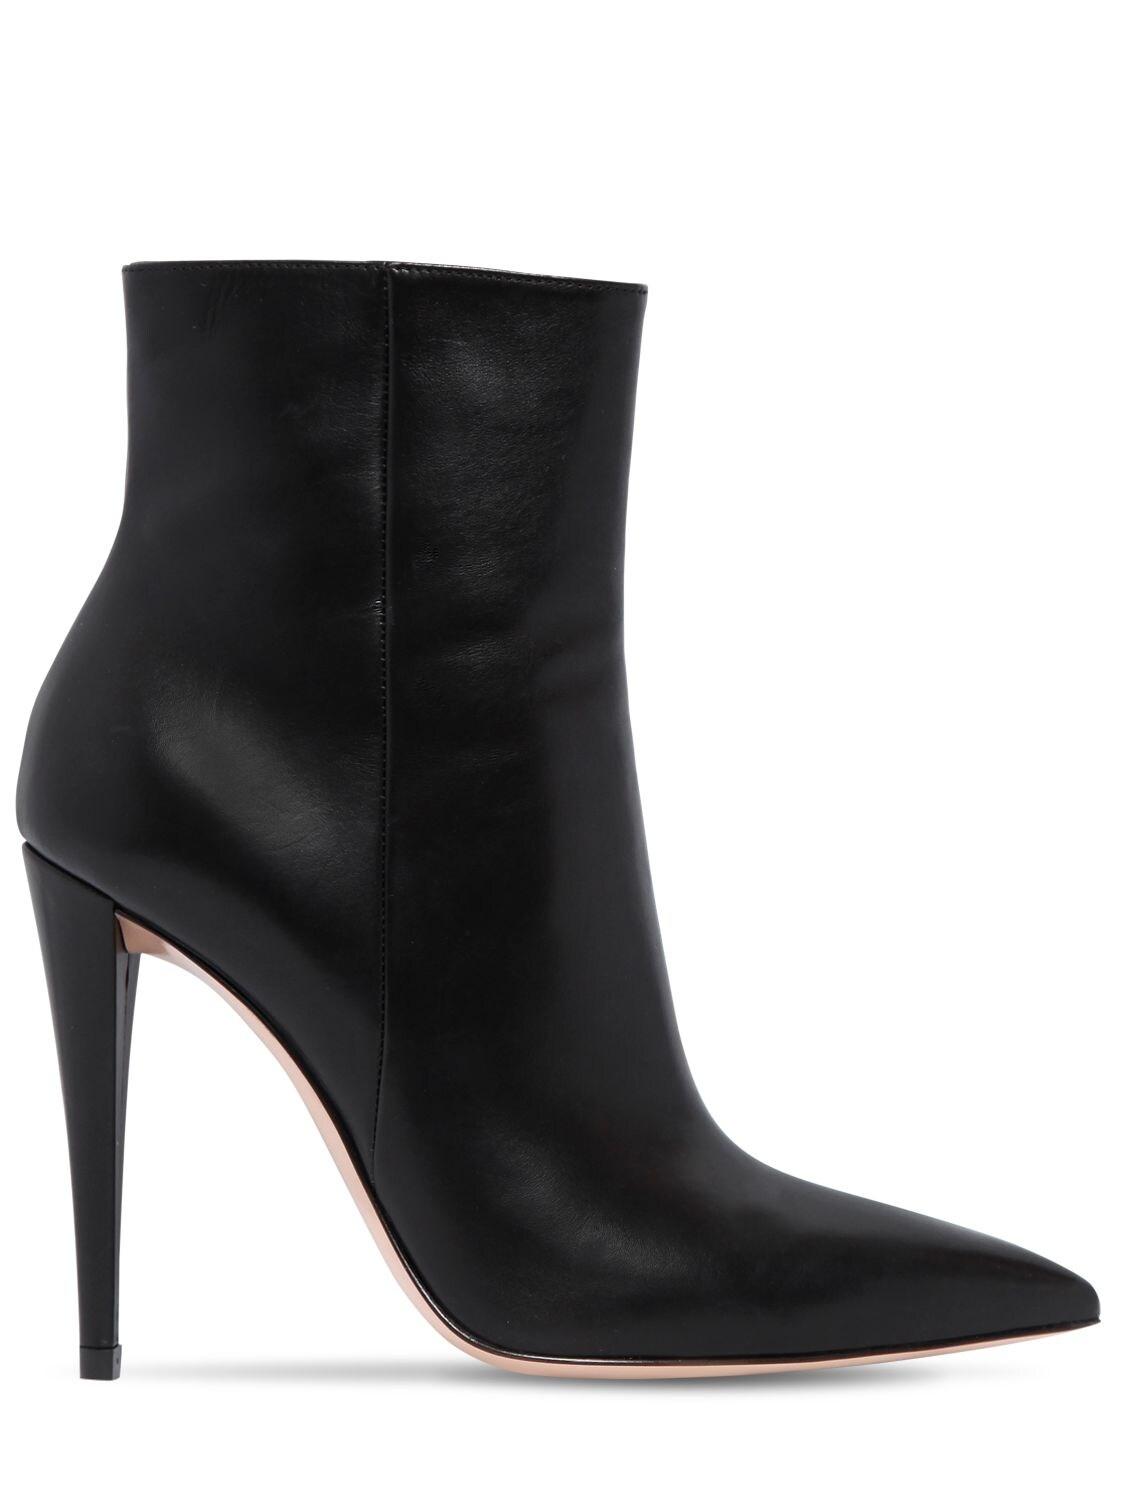 Gianvito Rossi 100mm Scarlet Leather Ankle Boots in Black - Save 55% - Lyst